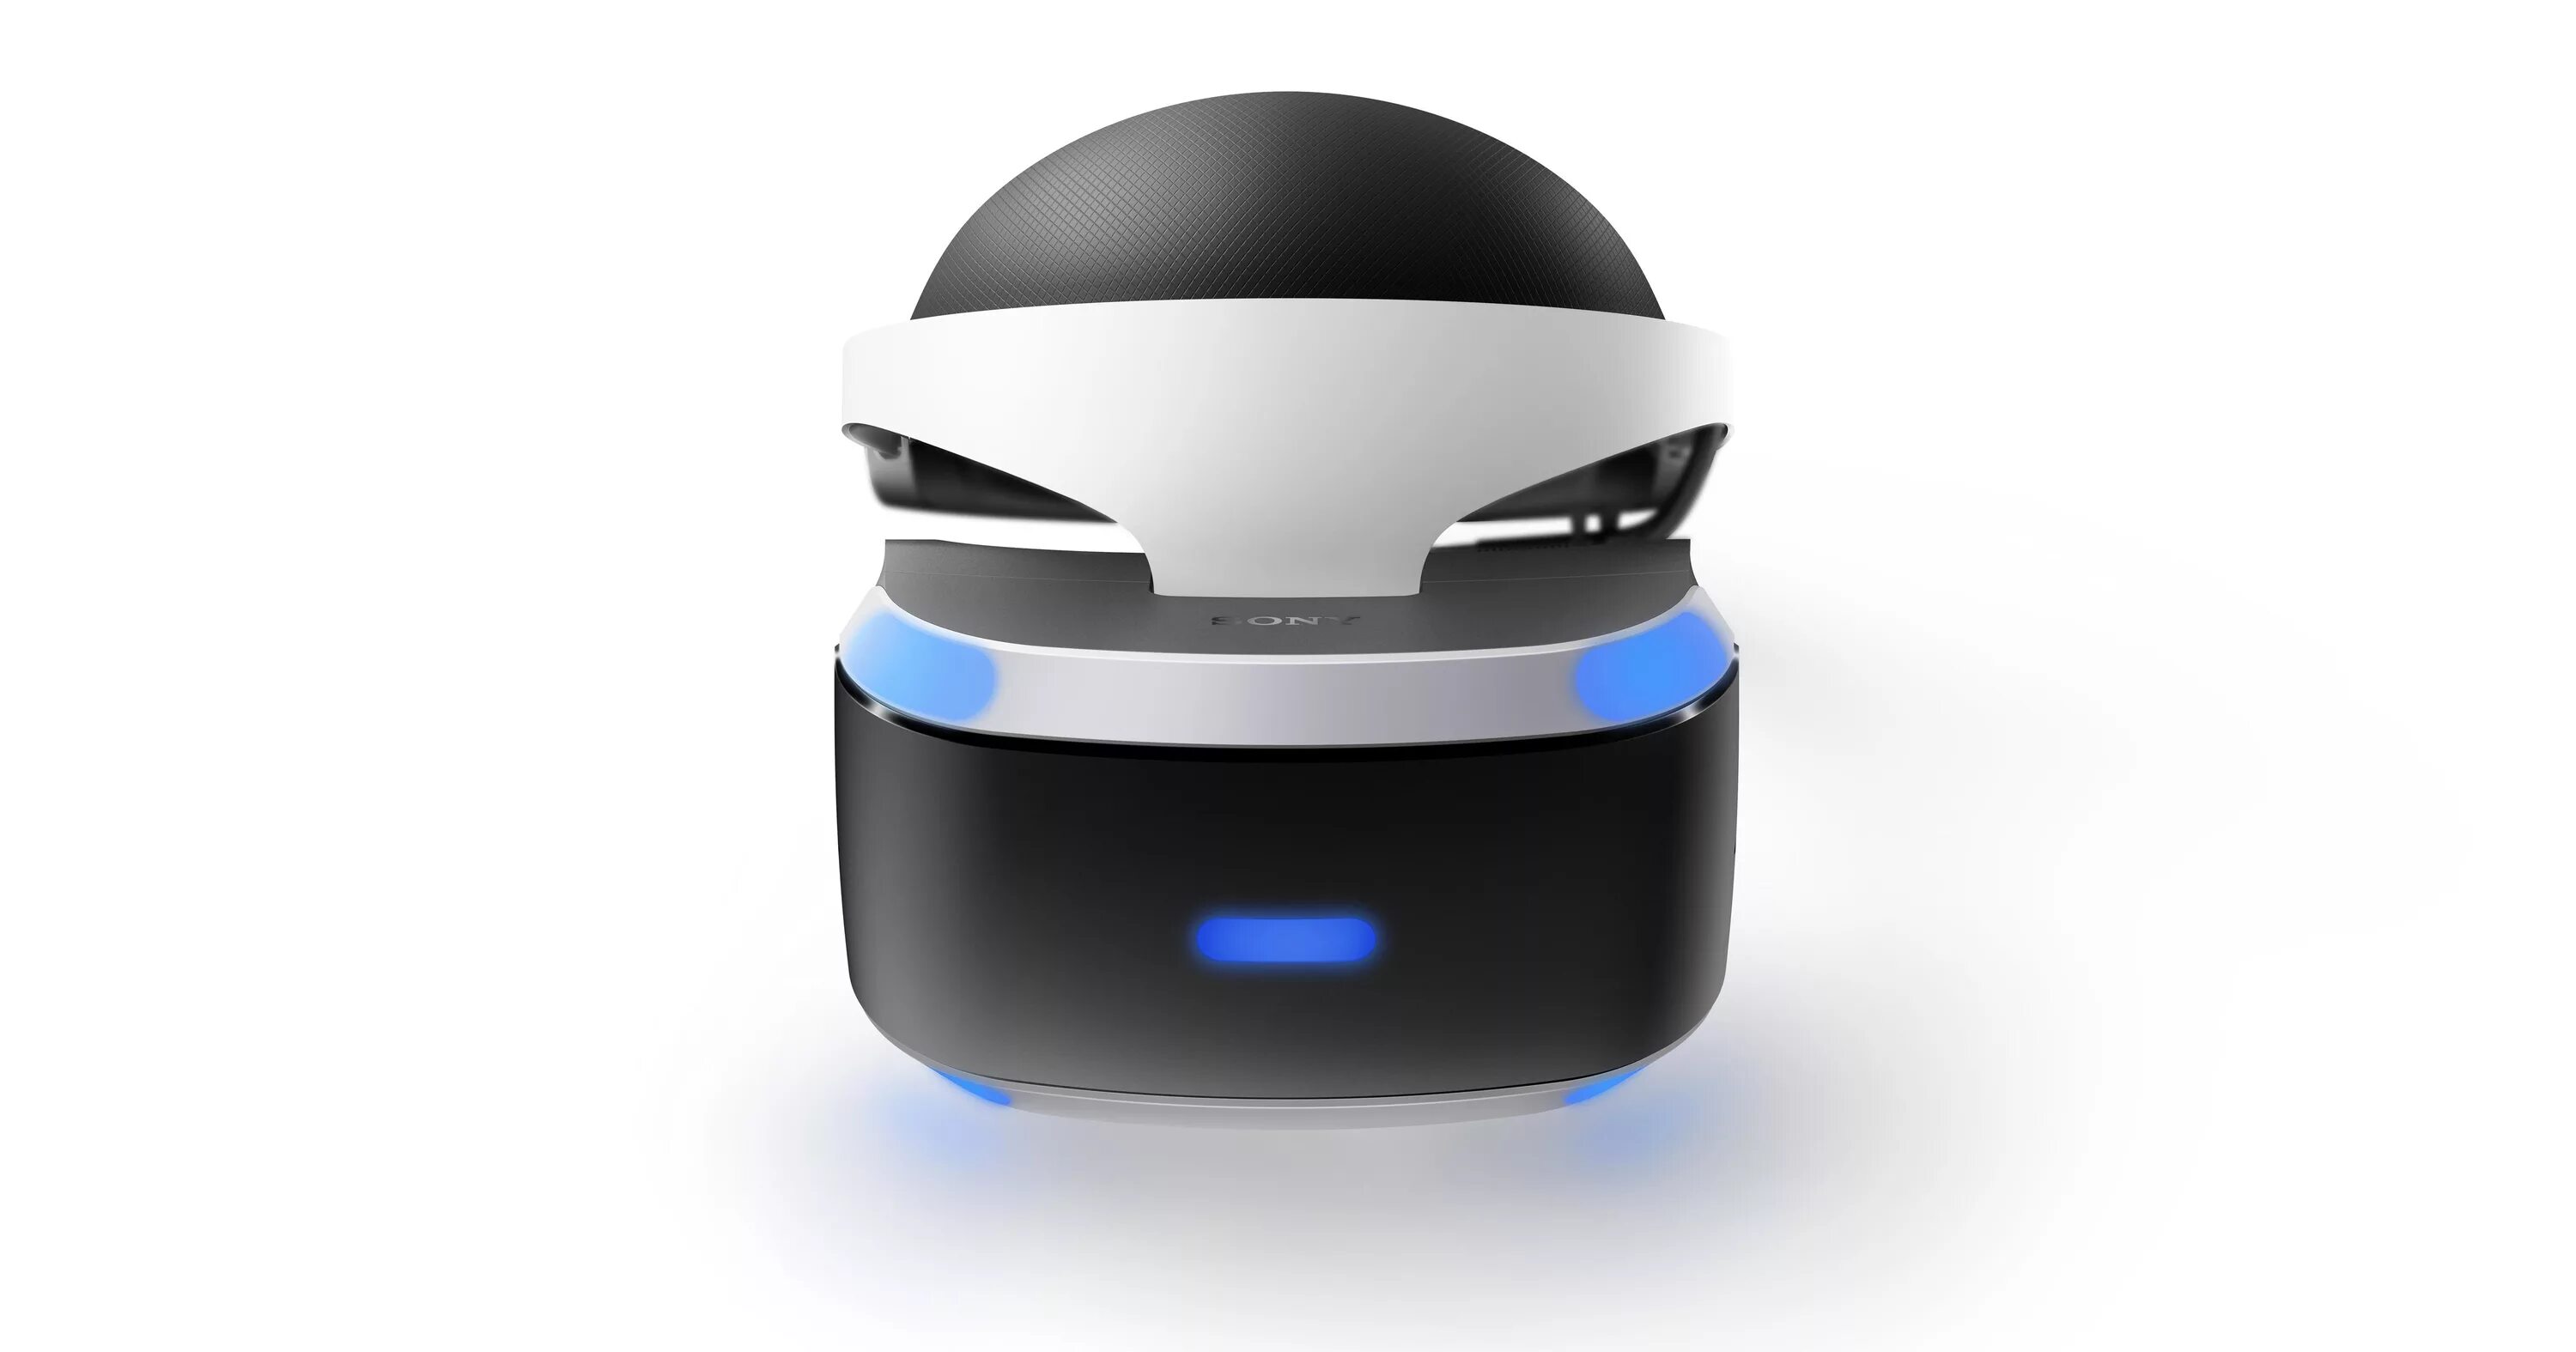 VR Sony PLAYSTATION 4. VR шлем - PLAYSTATION VR,. Sony ps4 VR. Sony PLAYSTATION VR CUH-zvr1. Очки реальности ps4